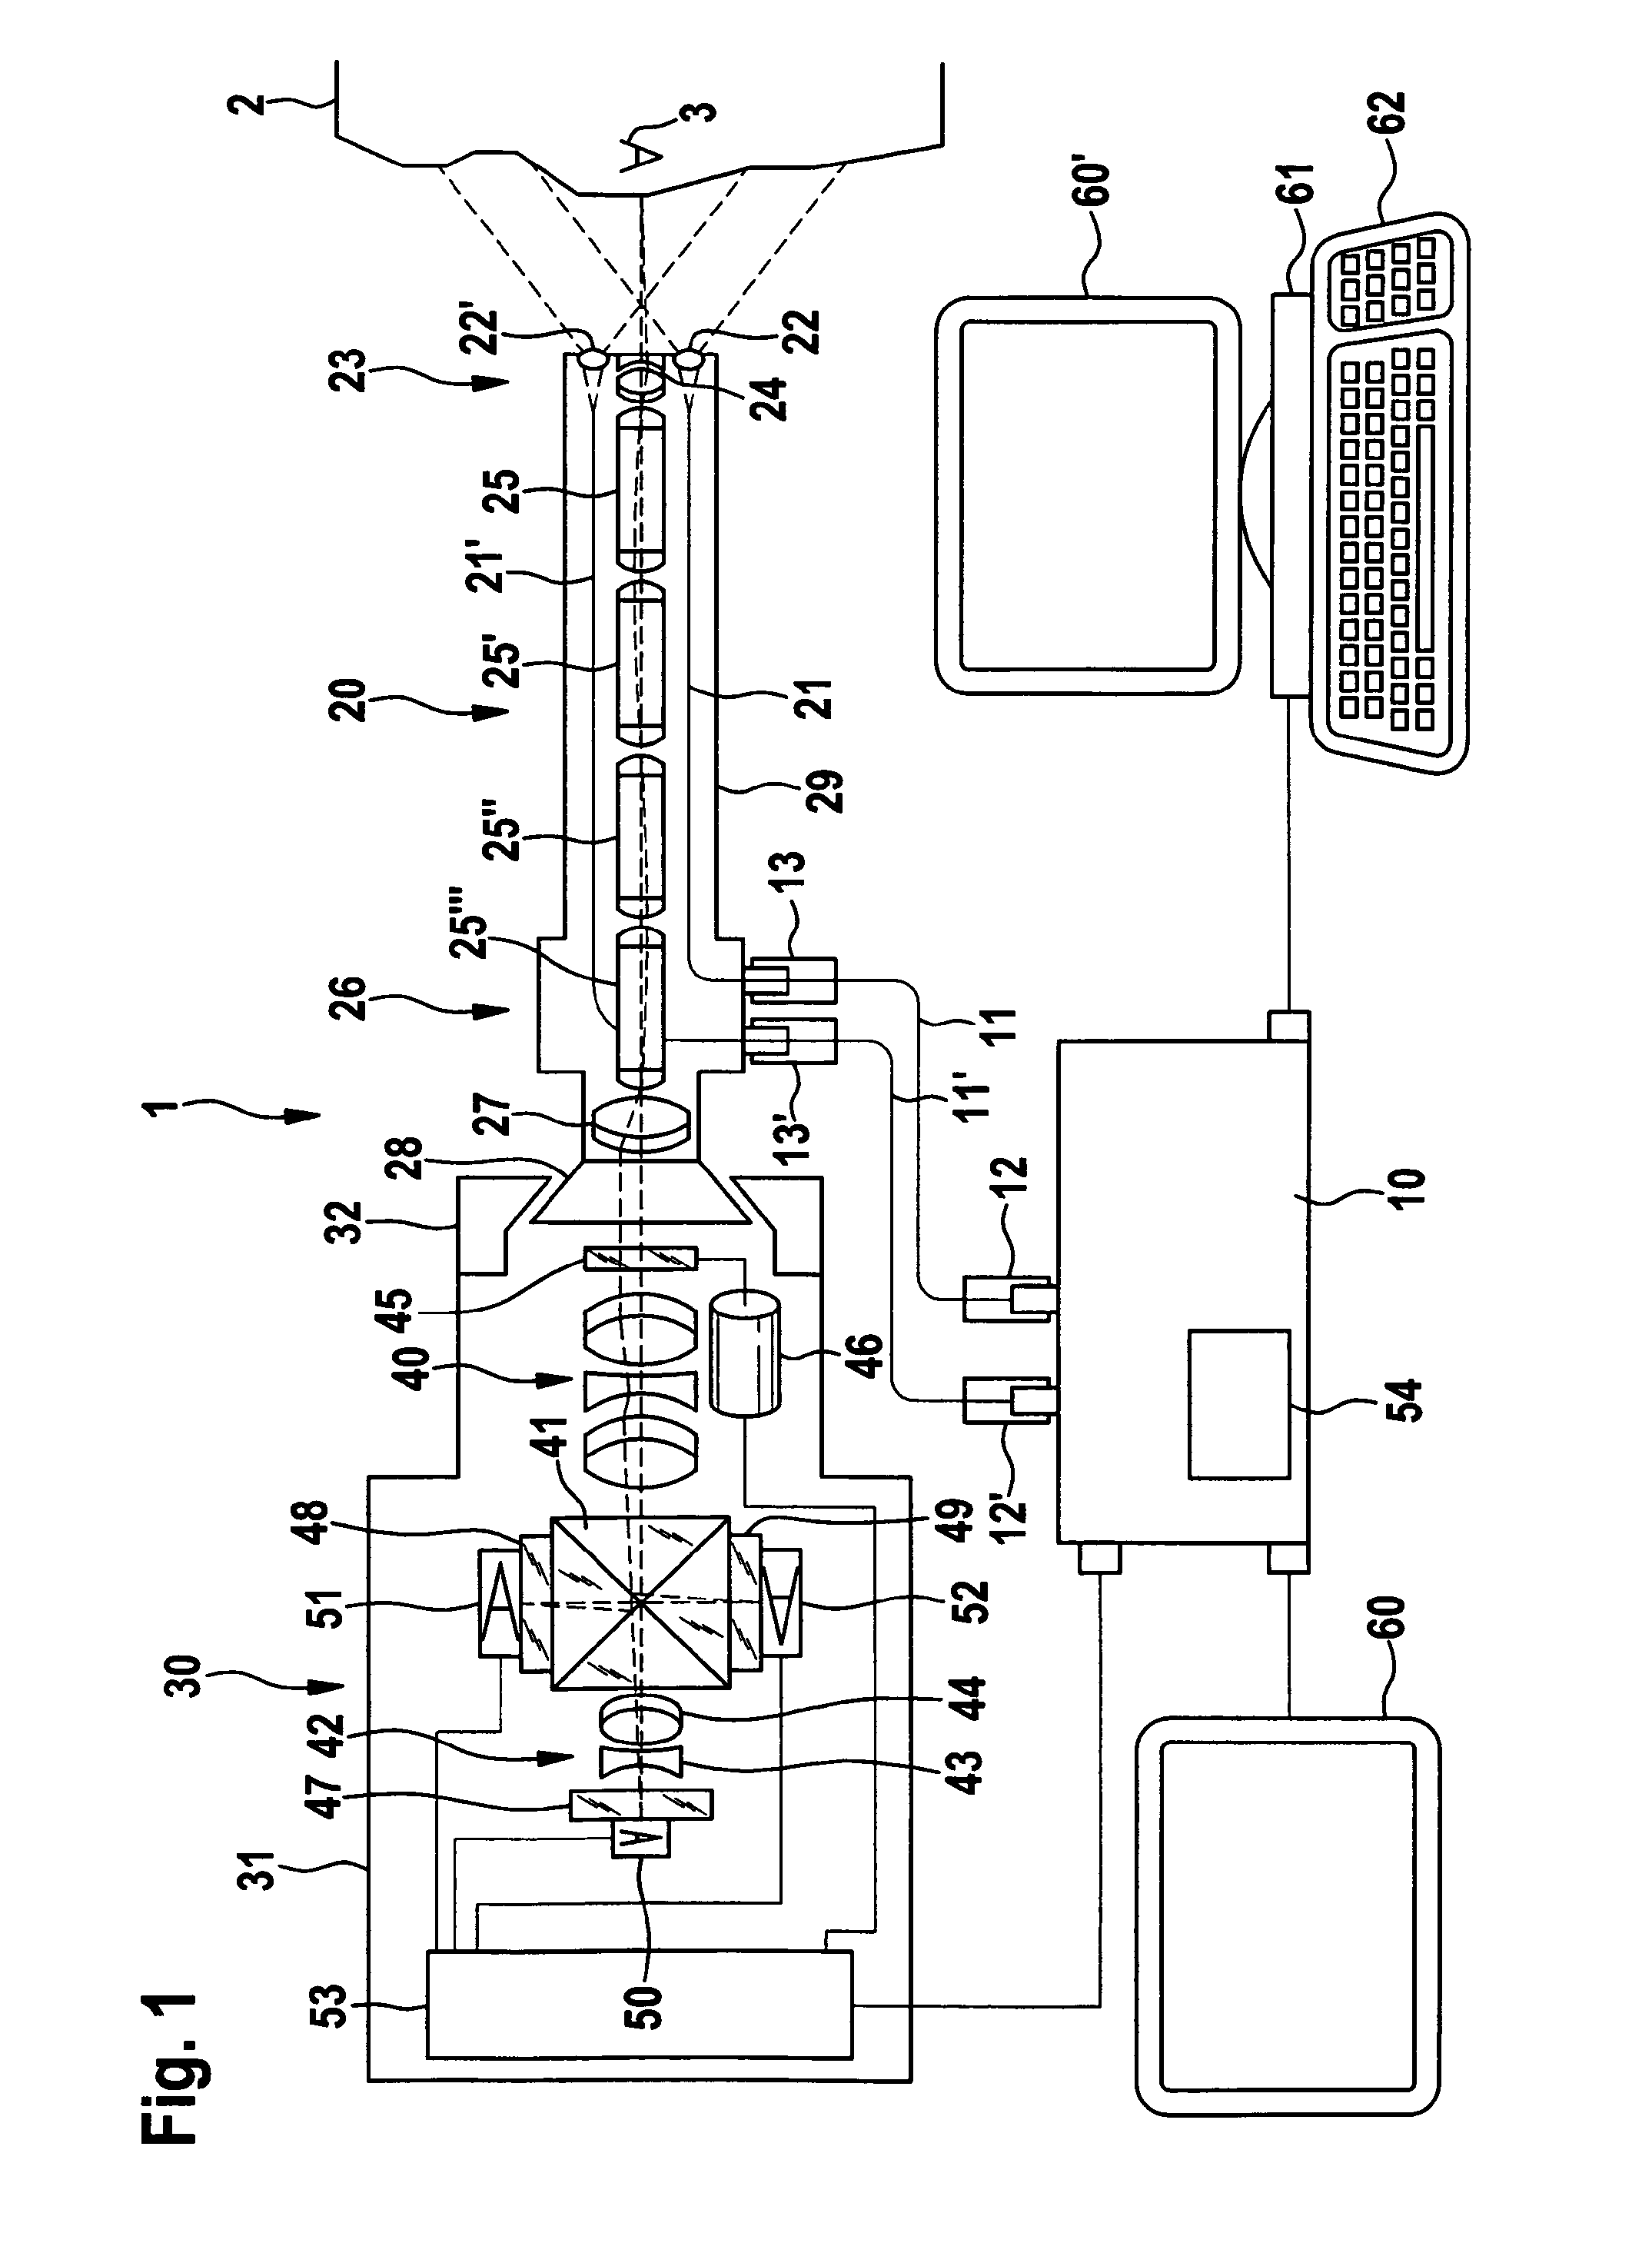 Apparatus and method for fluorescent imaging